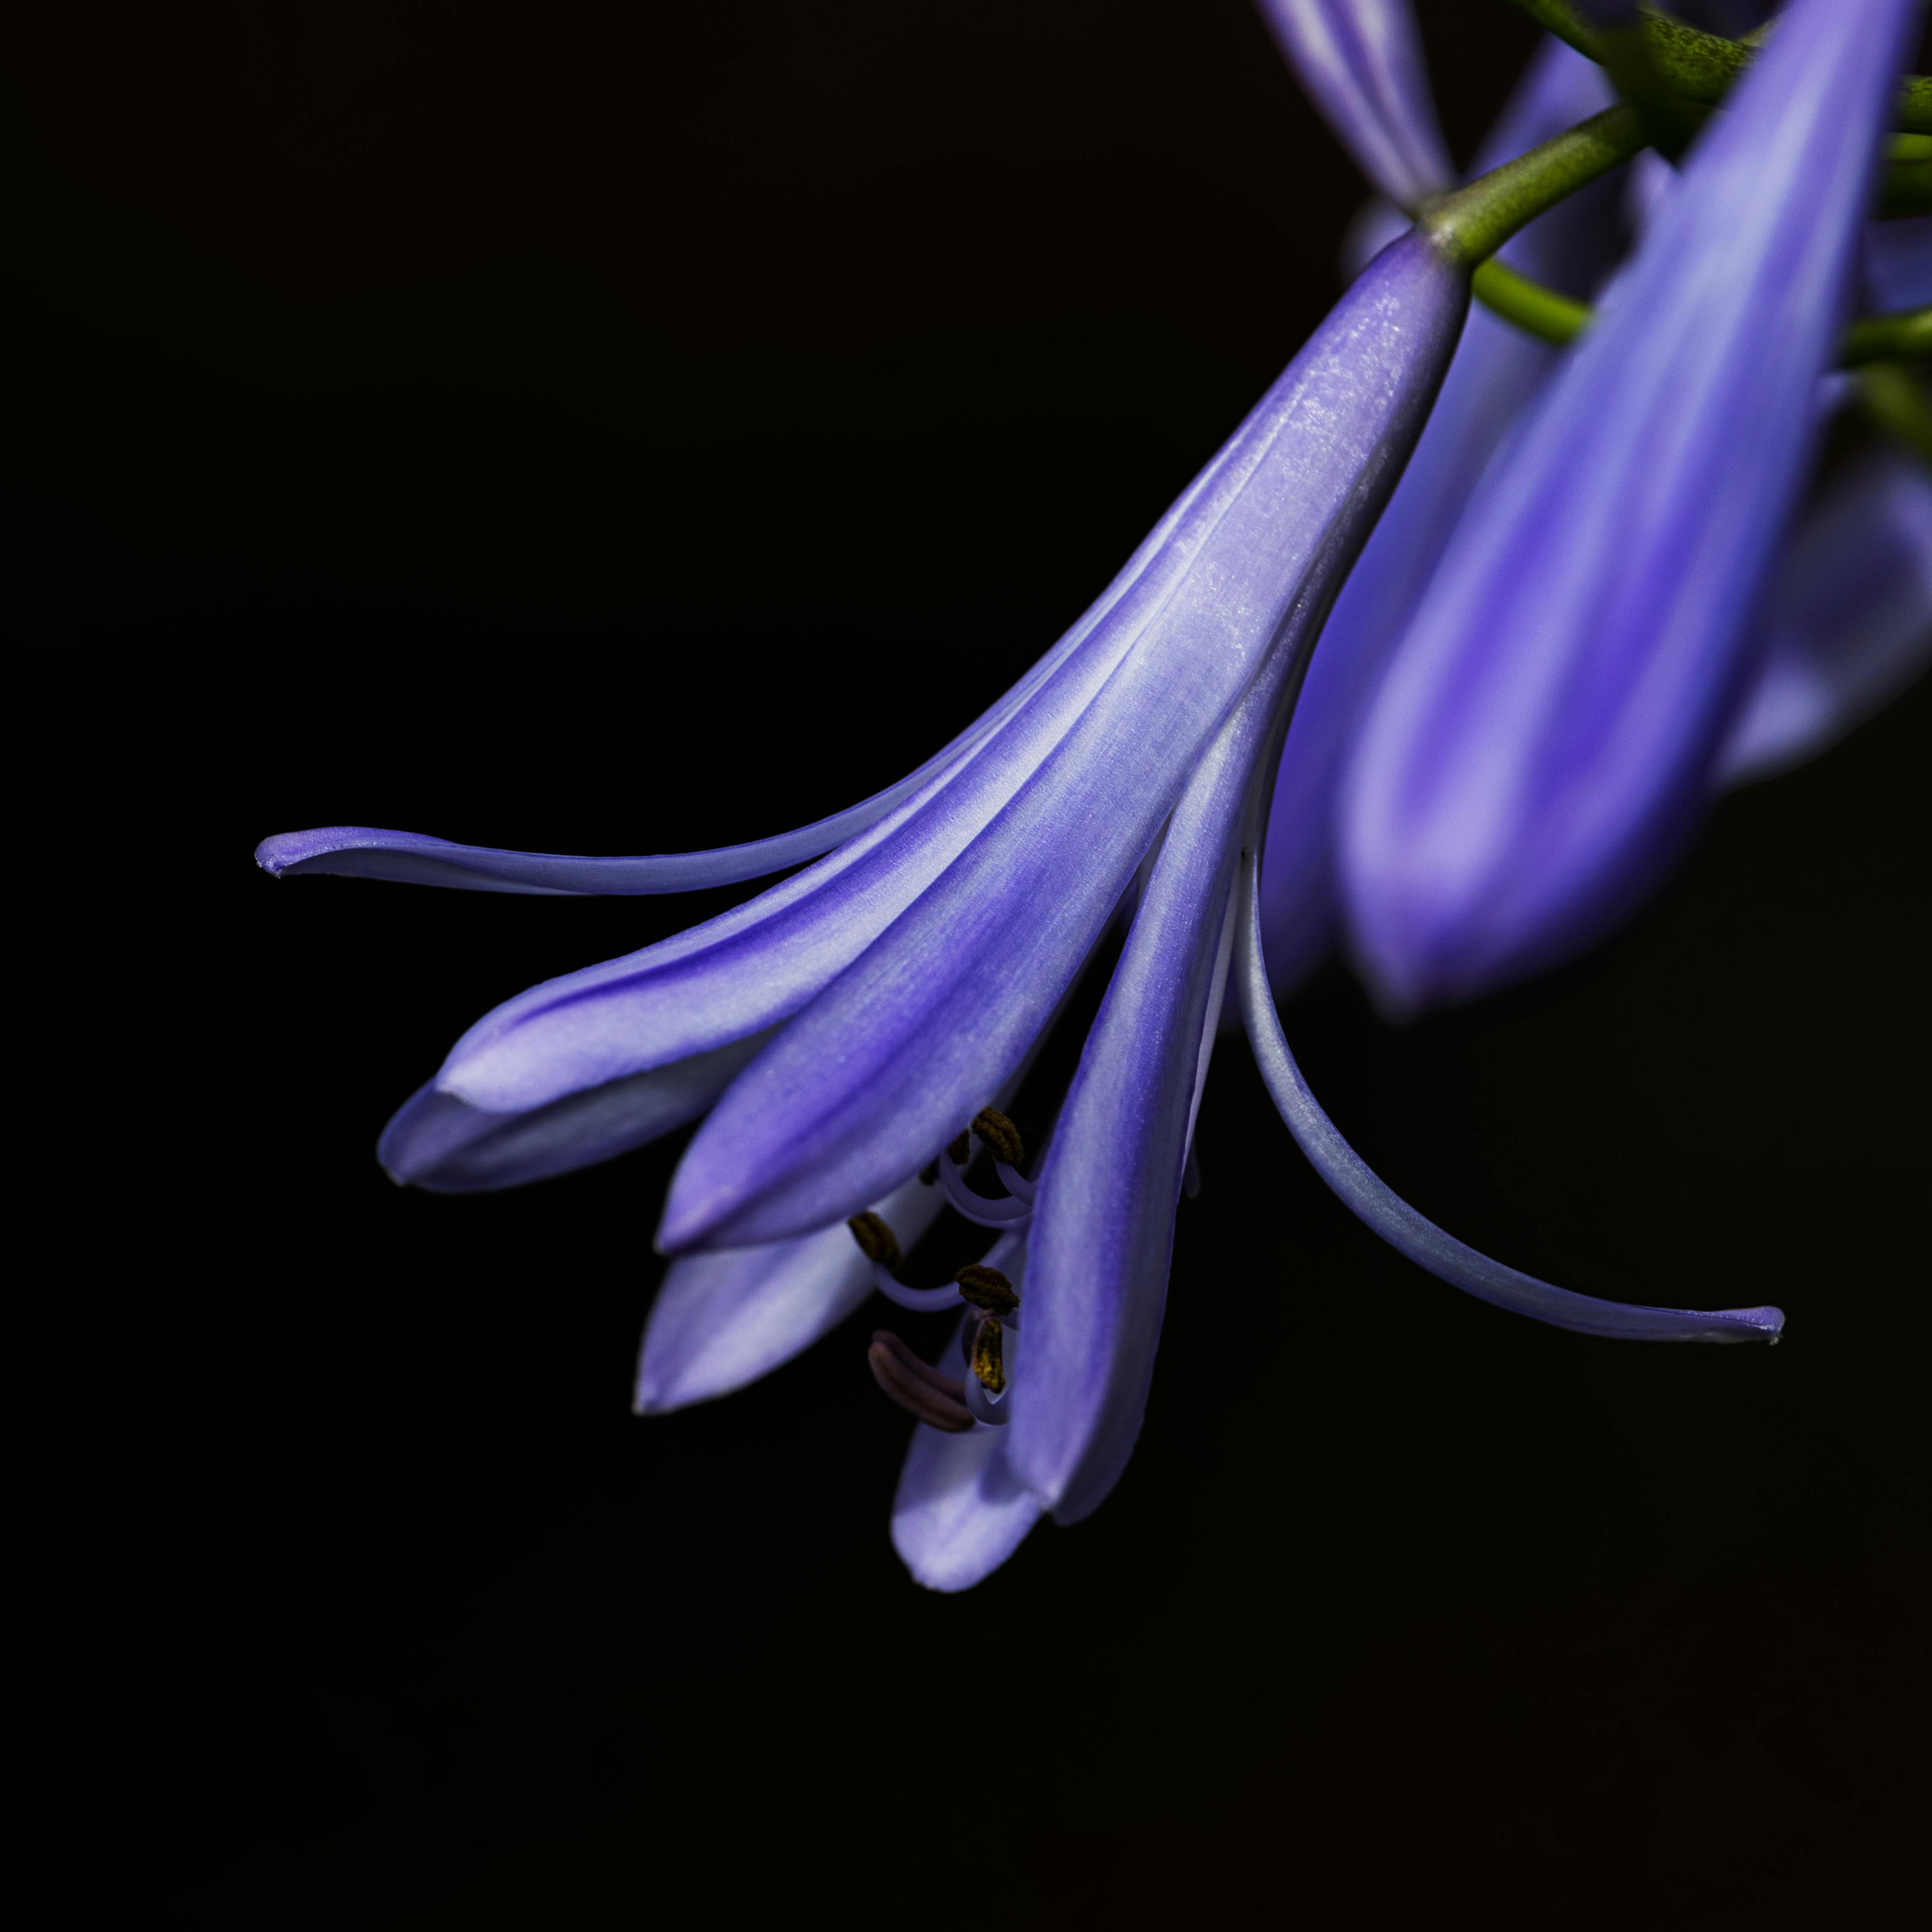 black blue and purple lily